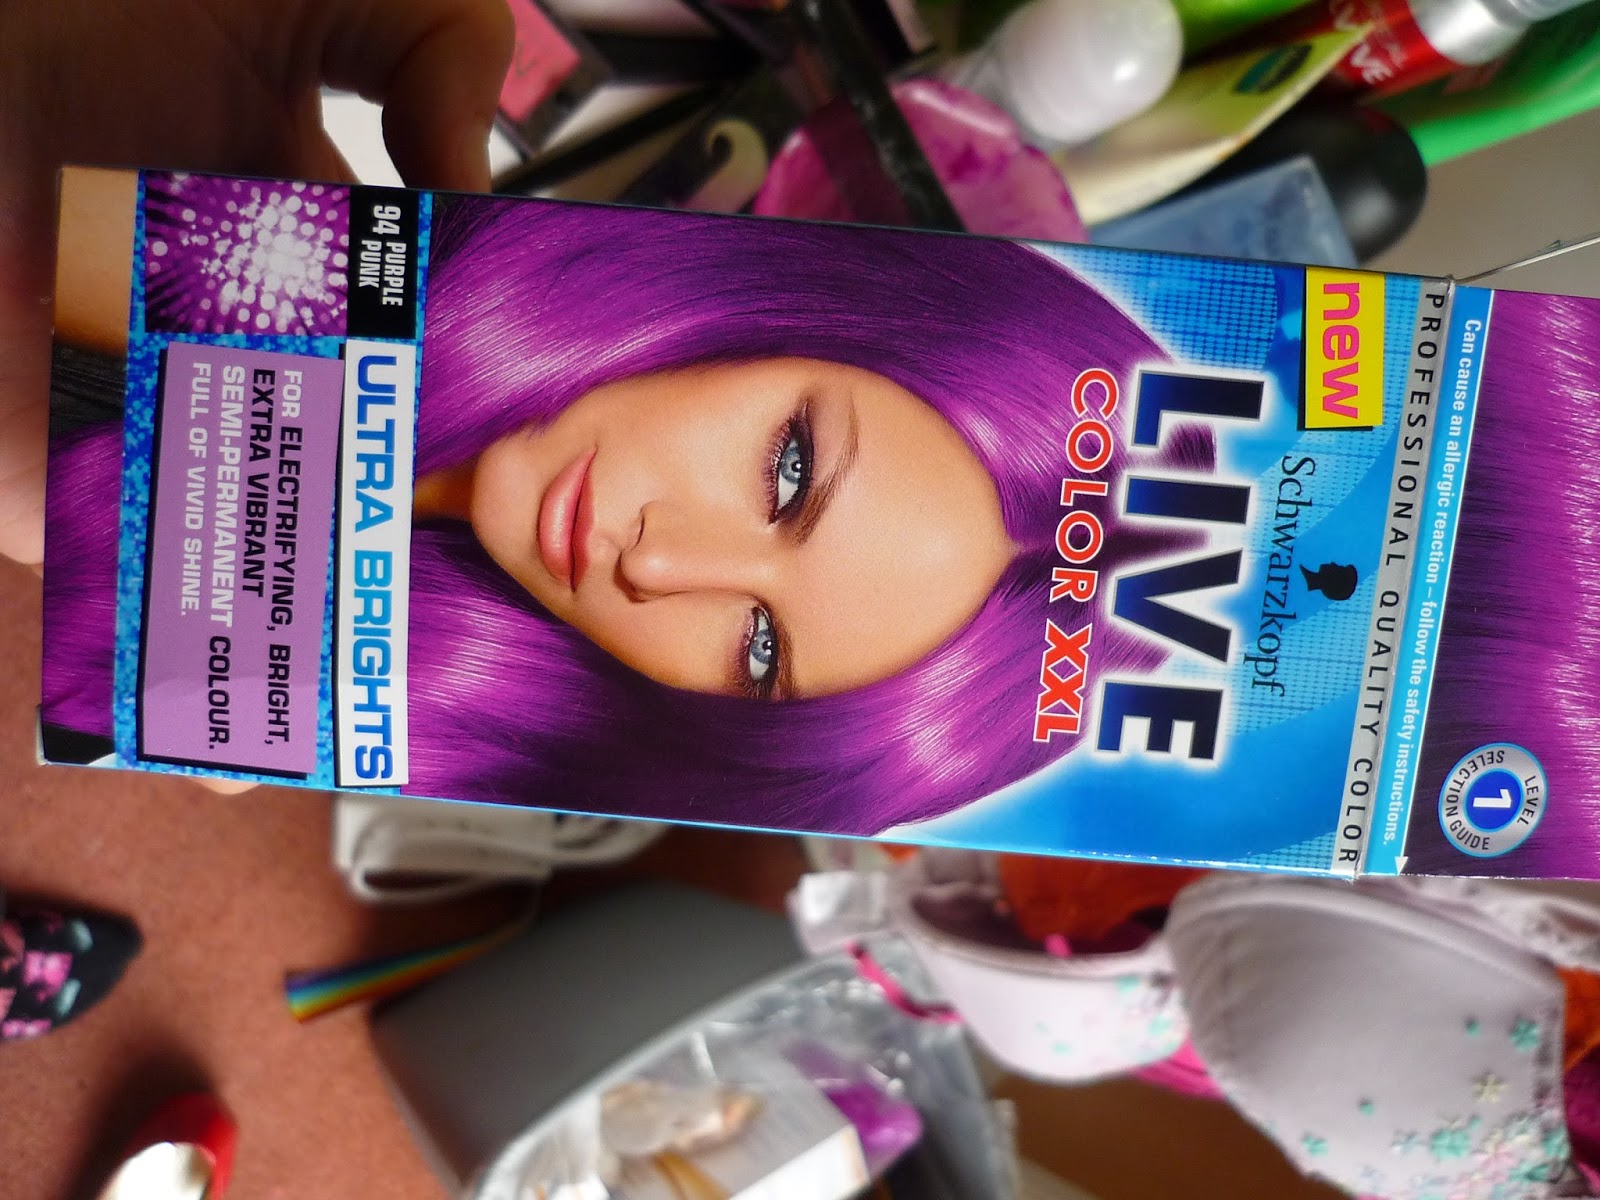 3. Schwarzkopf Live Color XXL Ultra Brights 96 Turquoise Temptation Semi-Permanent Turquoise Hair Dye - wide 2